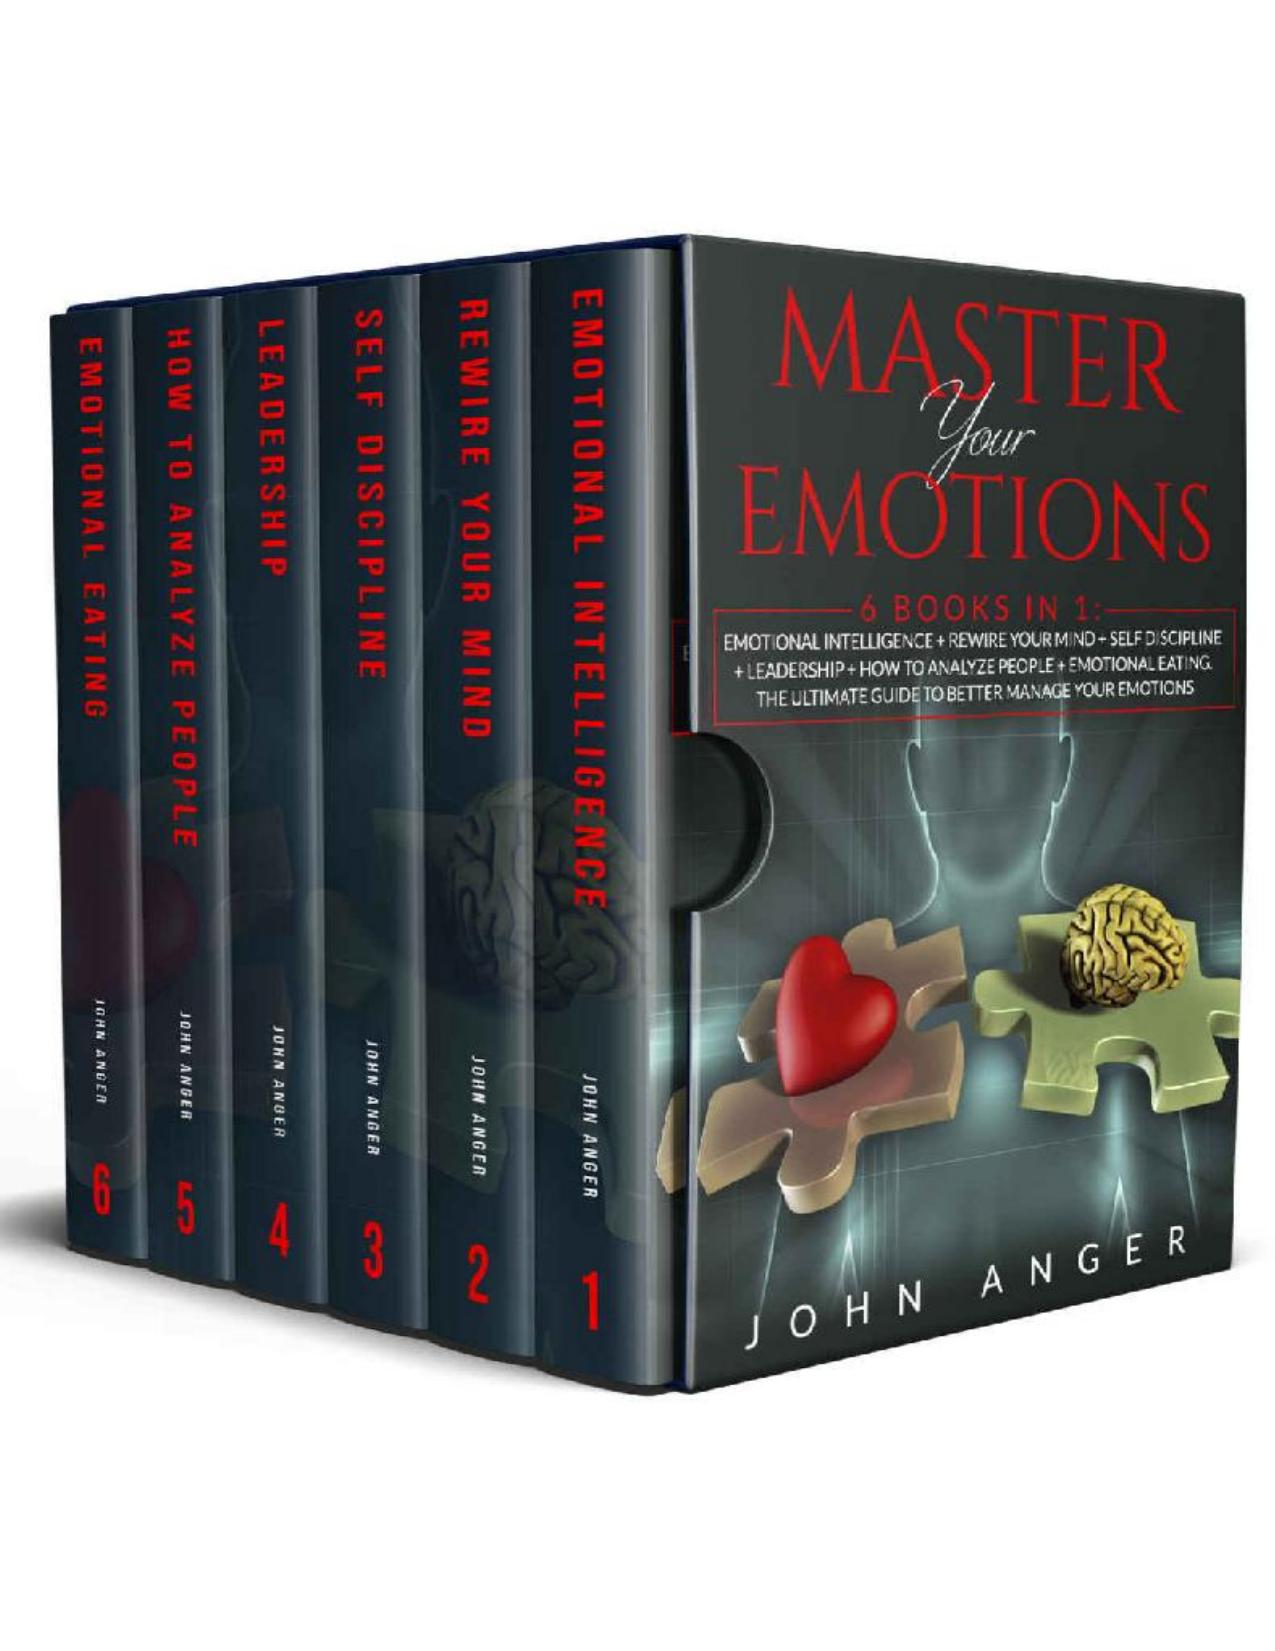 Master Your Emotions: 6 Books in 1: Emotional Intelligence+Rewire Your Mind+Self Discipline+Leadership+How to analyze people+Emotional Eating. The Ultimate Guide to Better Manage Your Emotions by John Anger